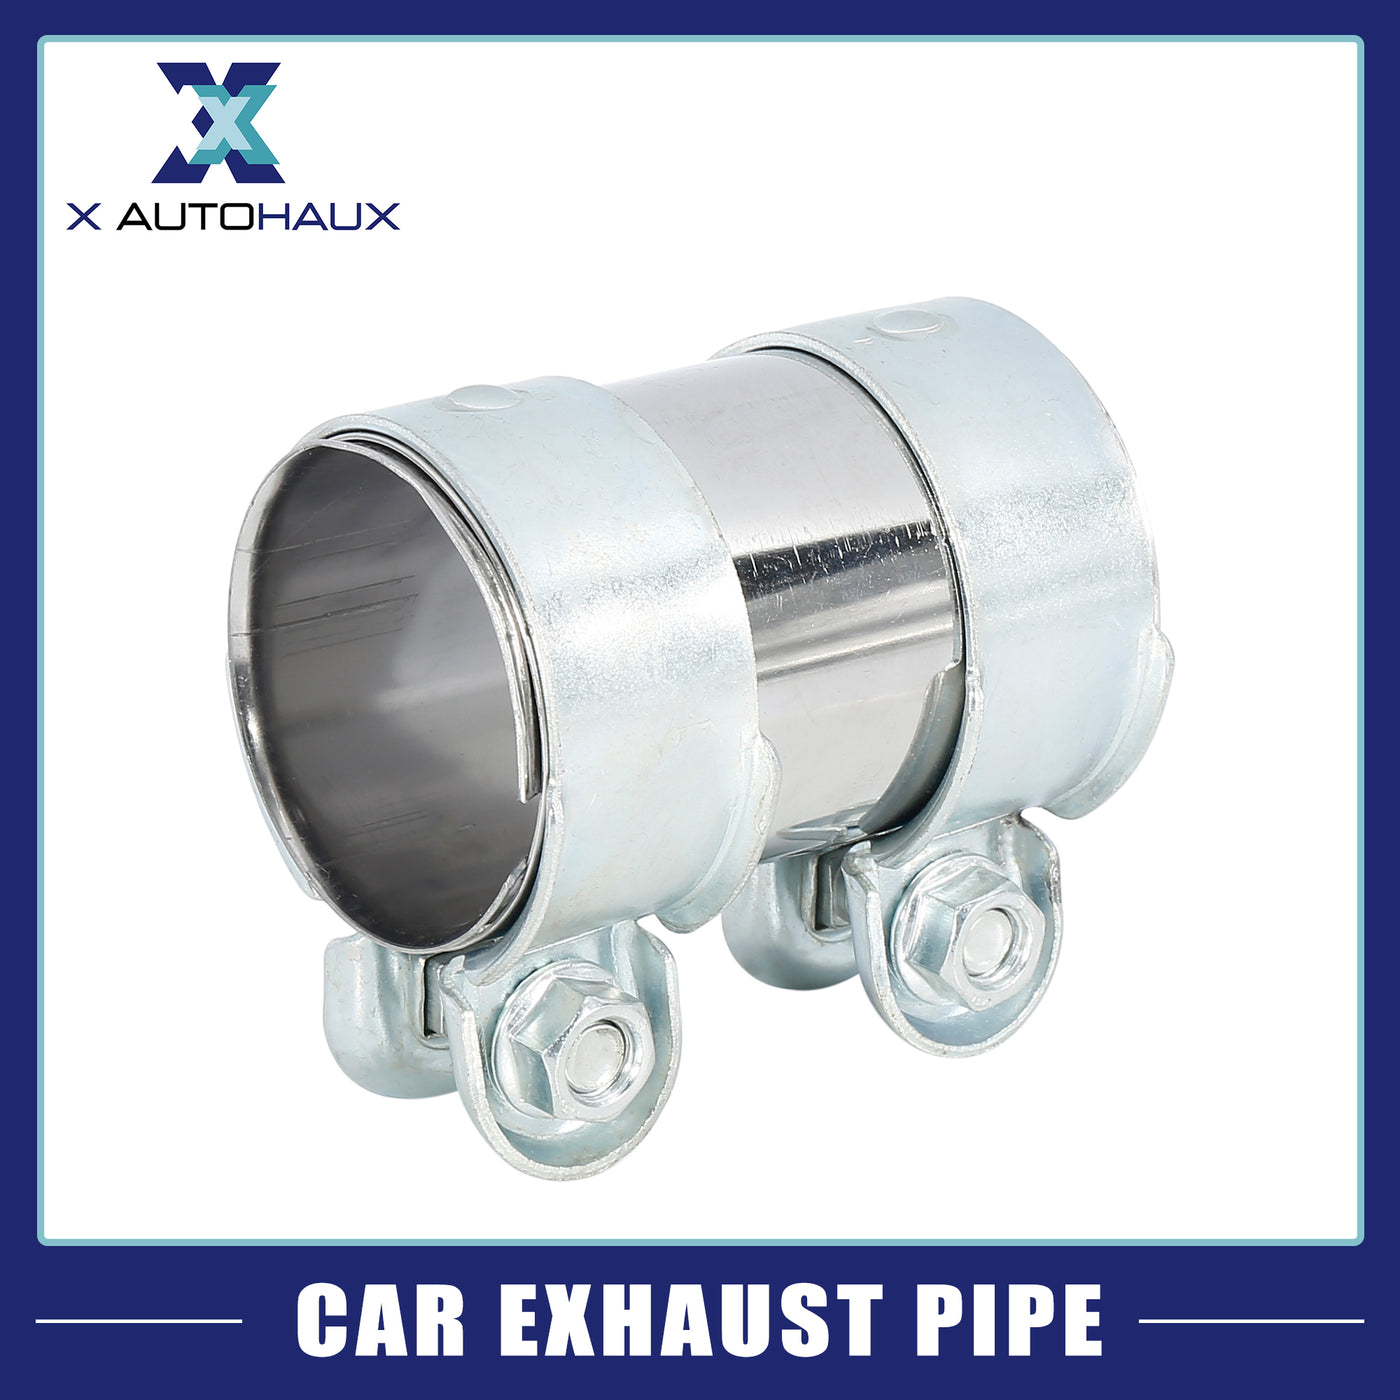 X AUTOHAUX Exhaust Pipe Sleeve Connector Clamp Coupler for Seat Toledo Ibiza 56 x 94 mm Silver Tone